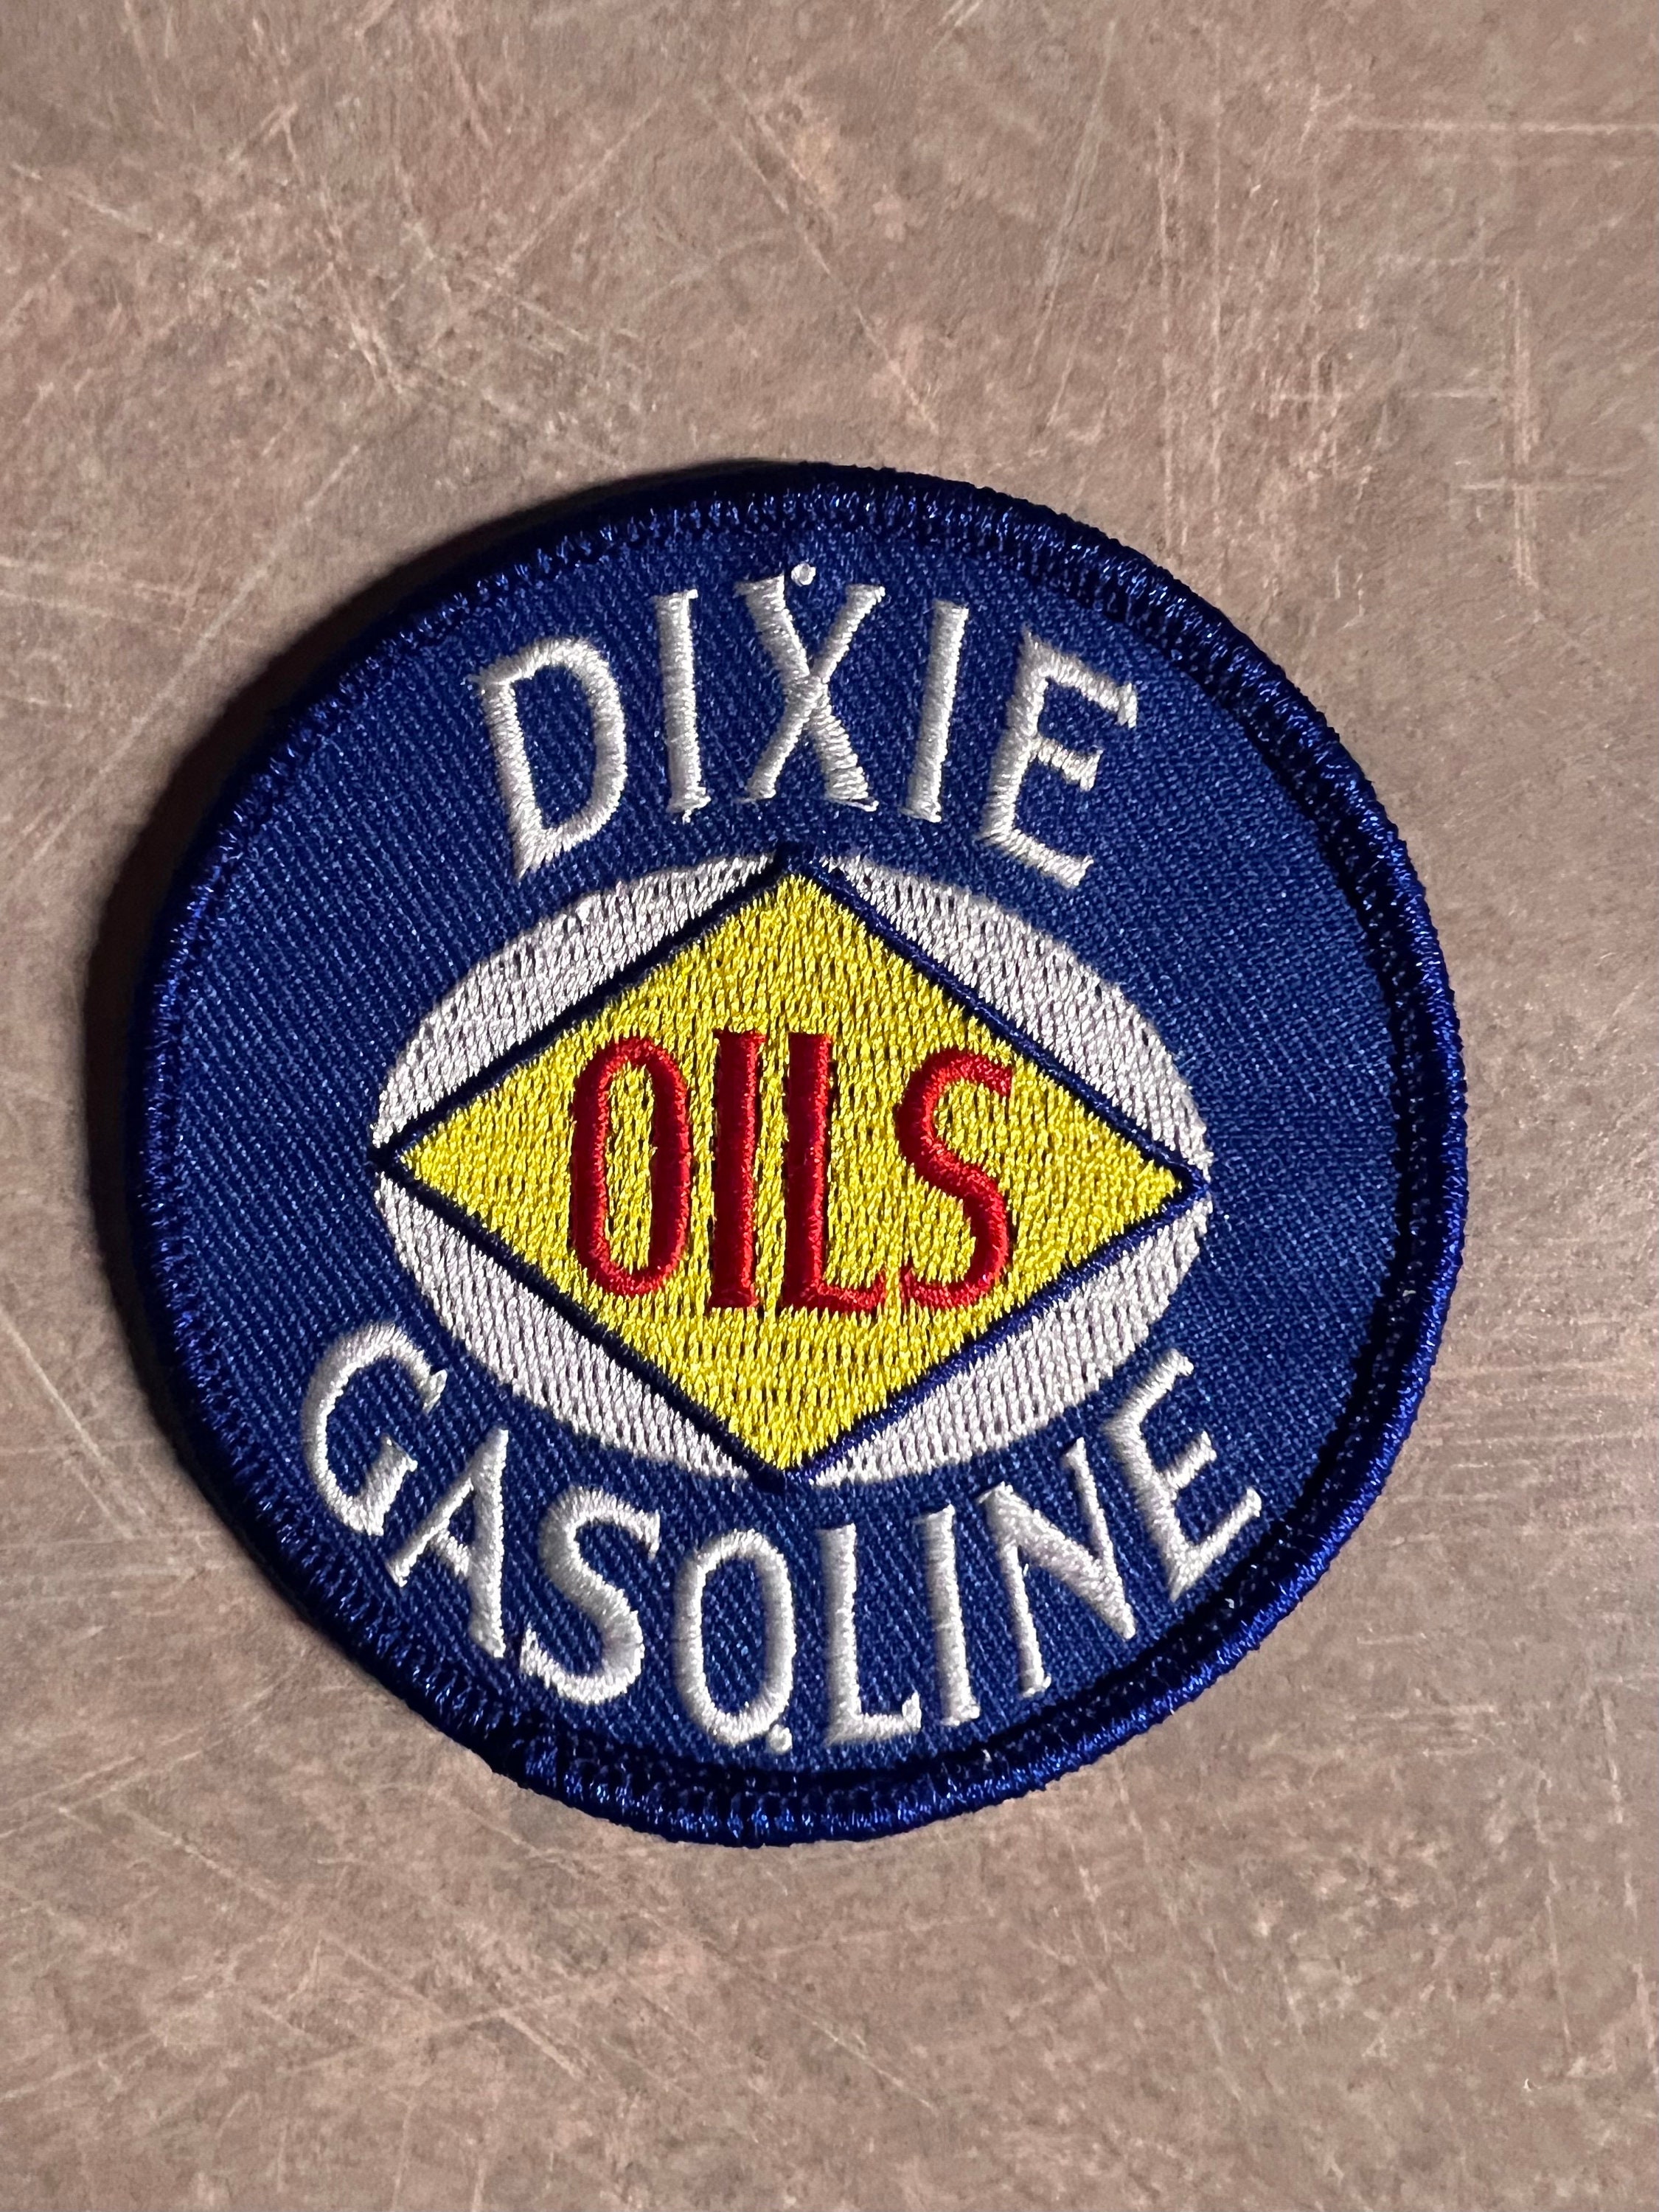 Vintage Embroidered Corporate Oil & Gas Clothing Patches Collectible  Memorabilia